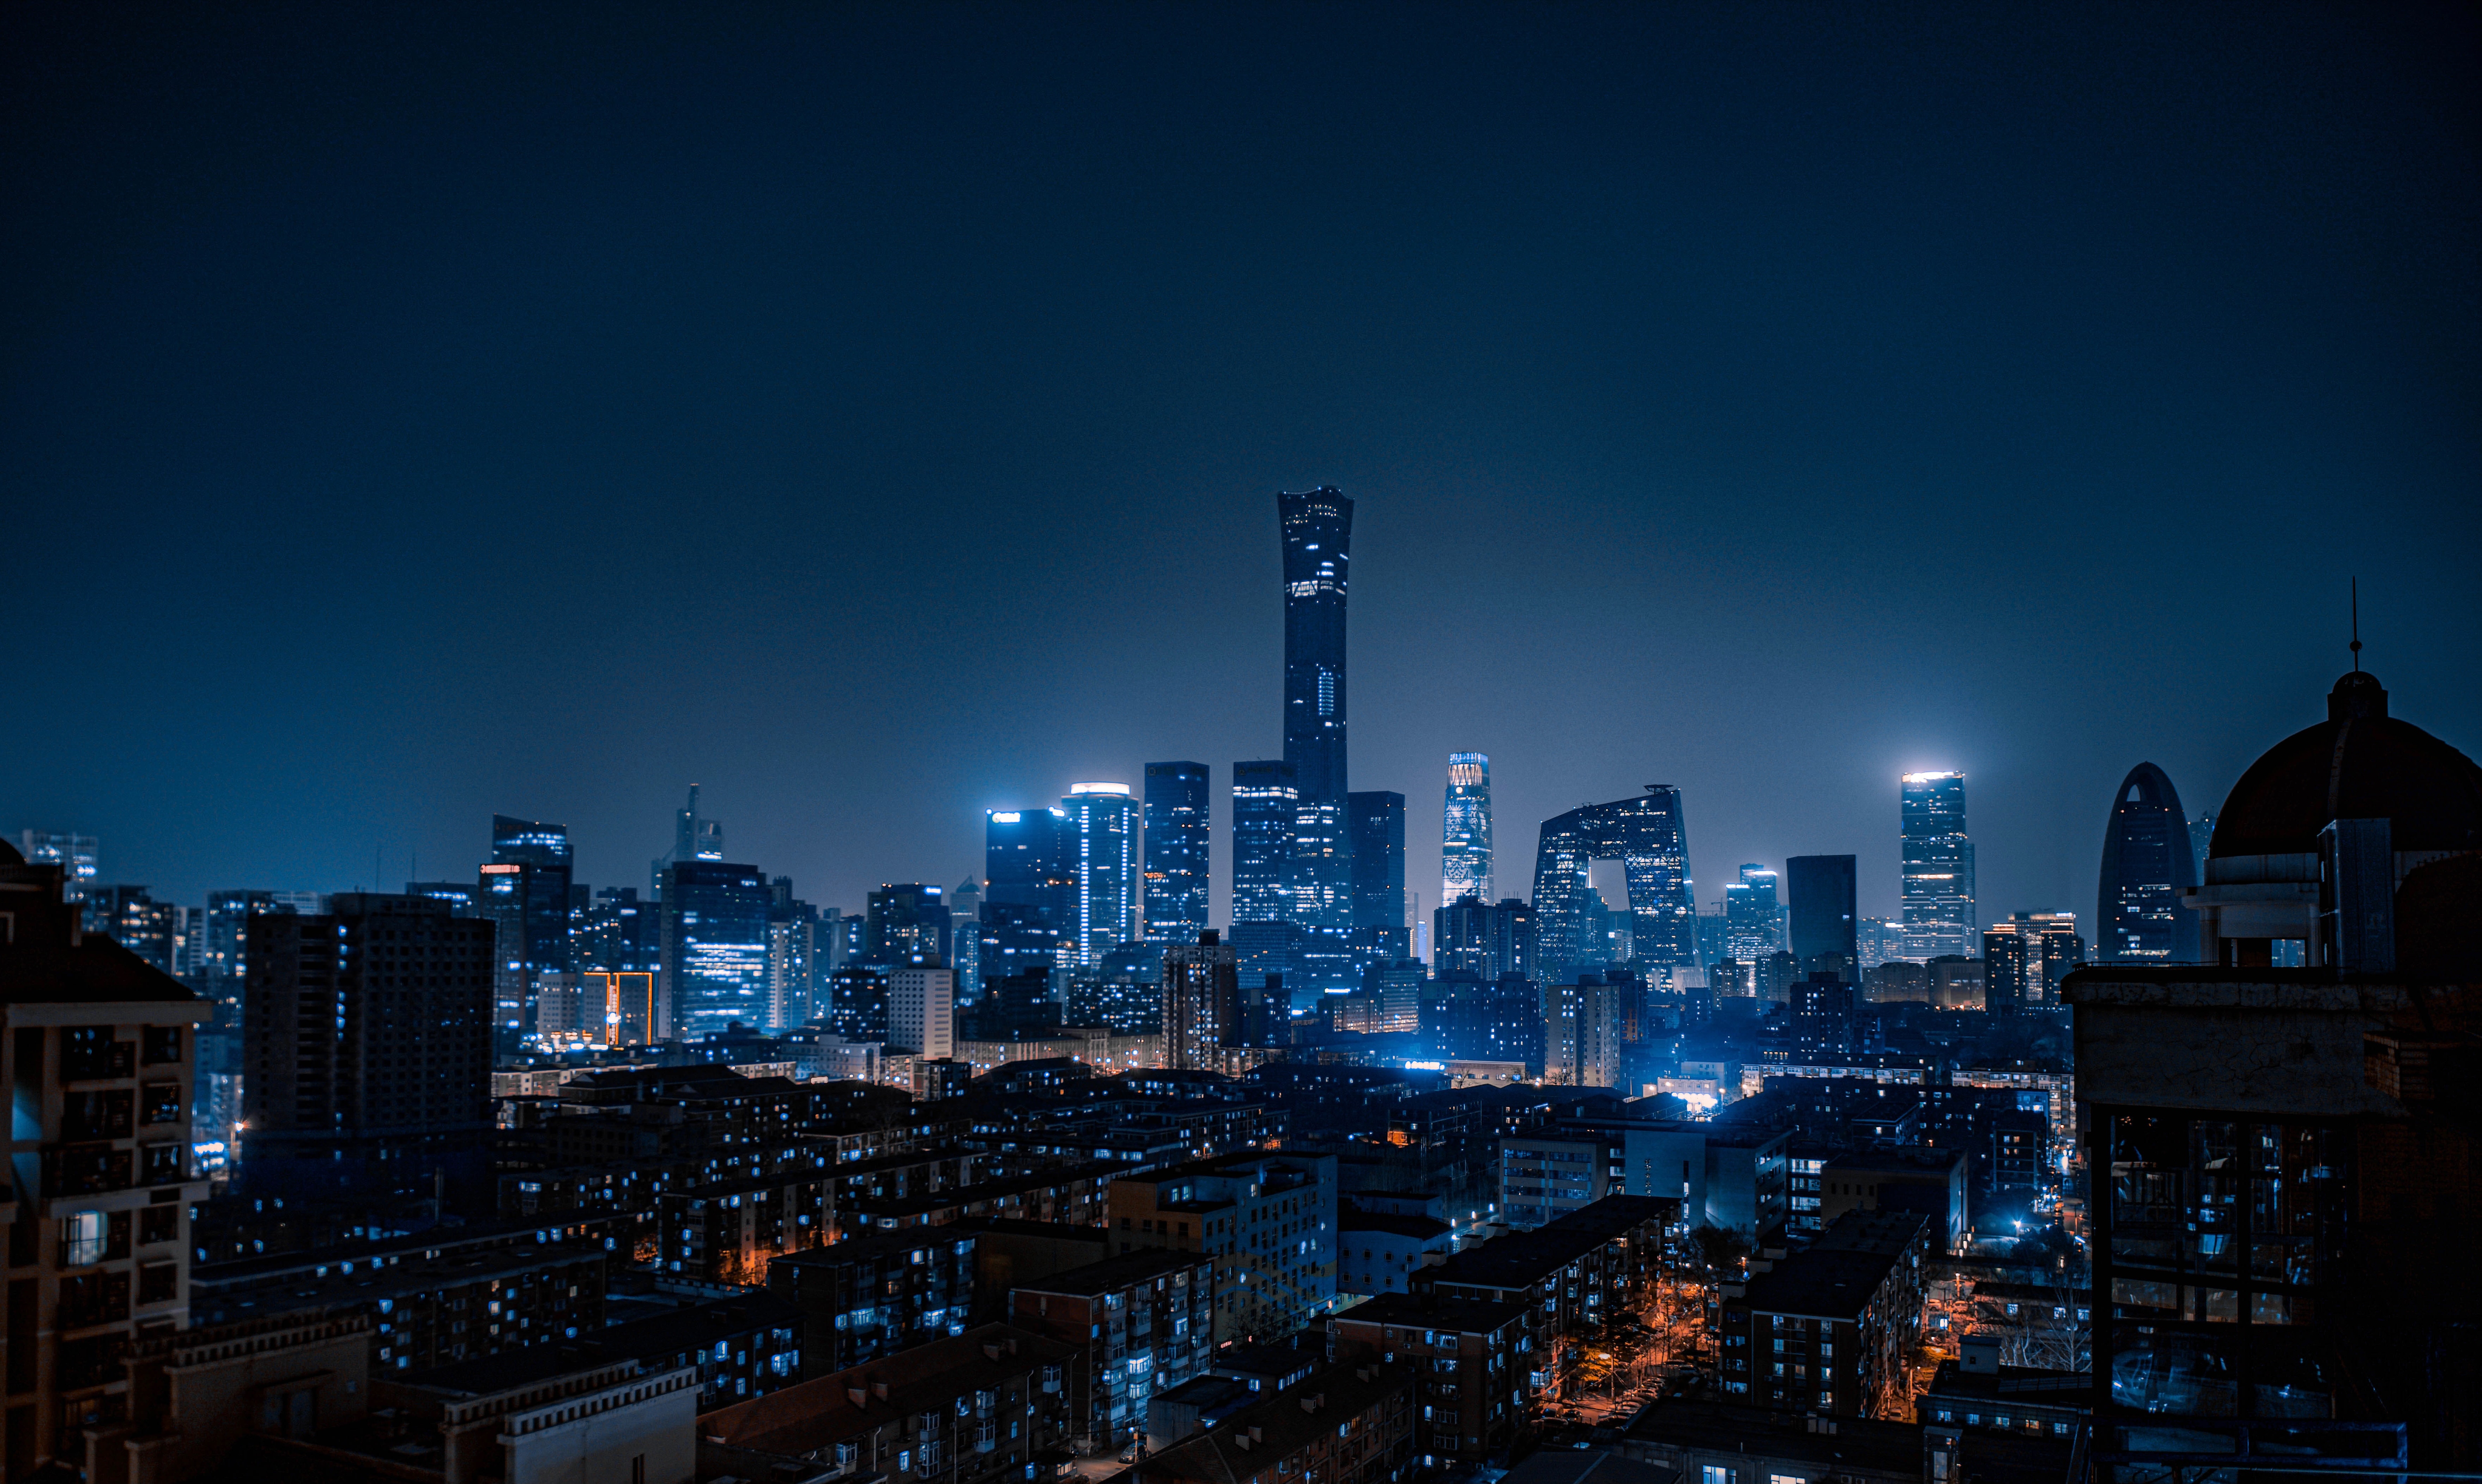 Horizontal Wallpaper night, view from above, cities, city, building, lights, china, beijing